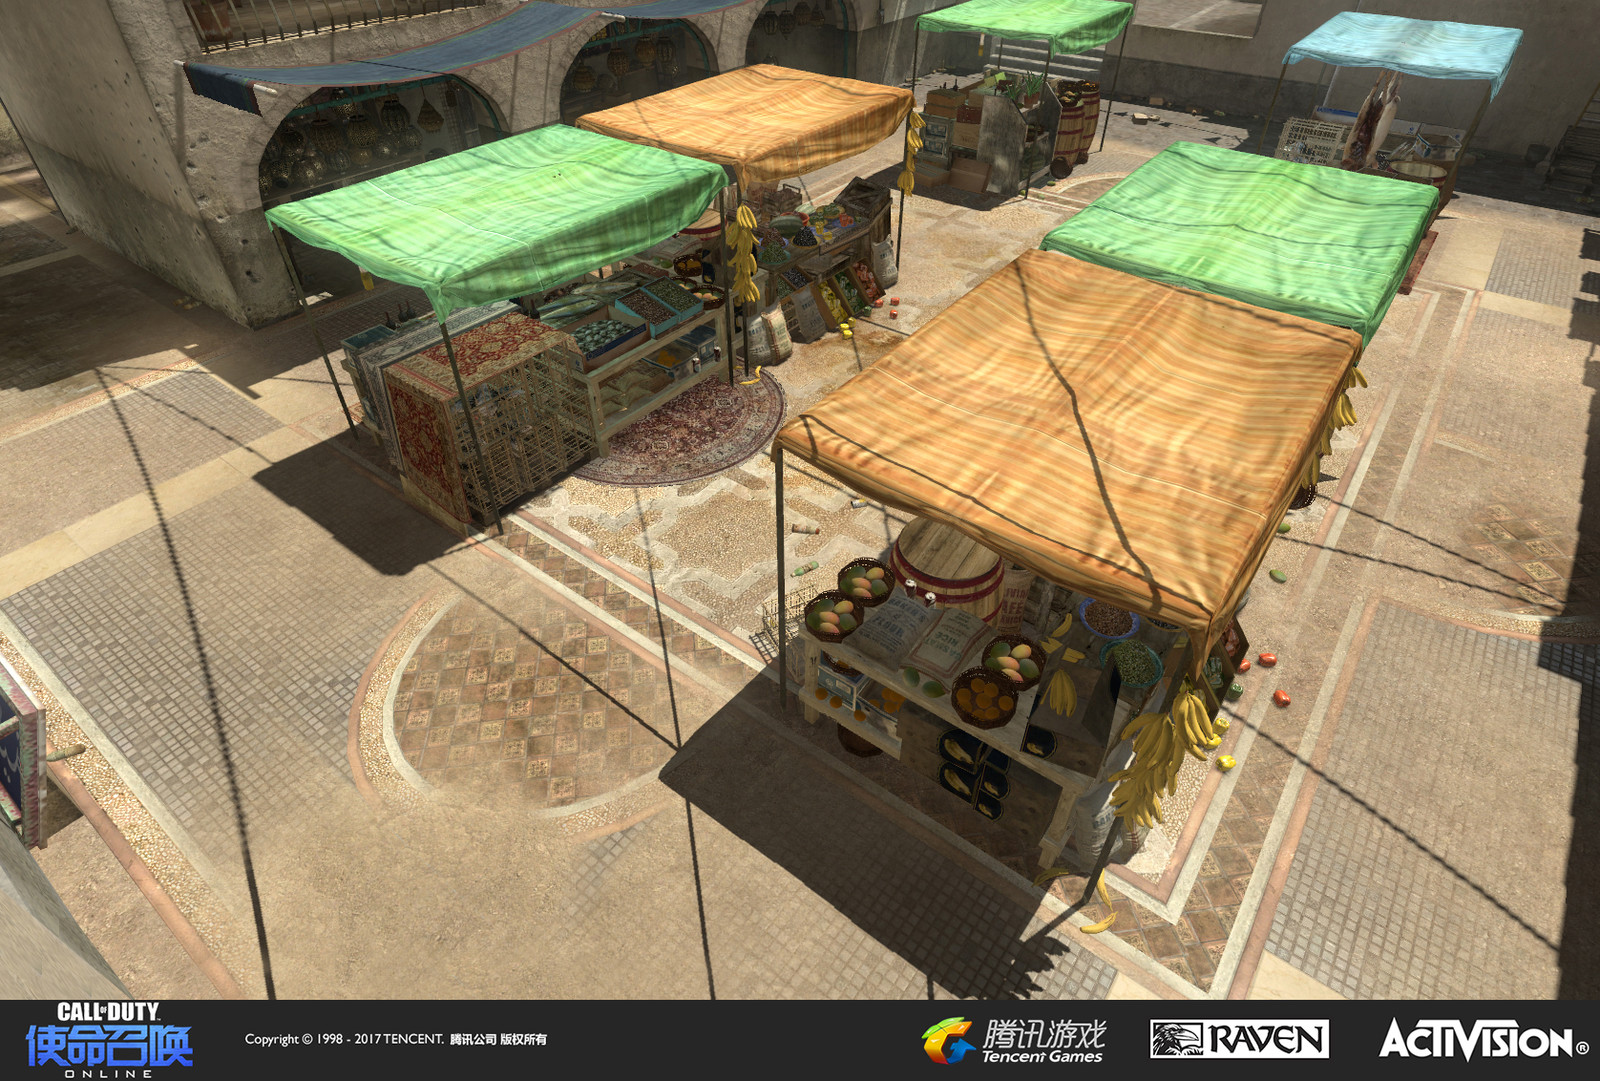 Seatown: A re-imagined multiplayer map originally appearing in Modern Warfare 3. I recreated the terrain and set dress to be more colorful and varied than the original setting.